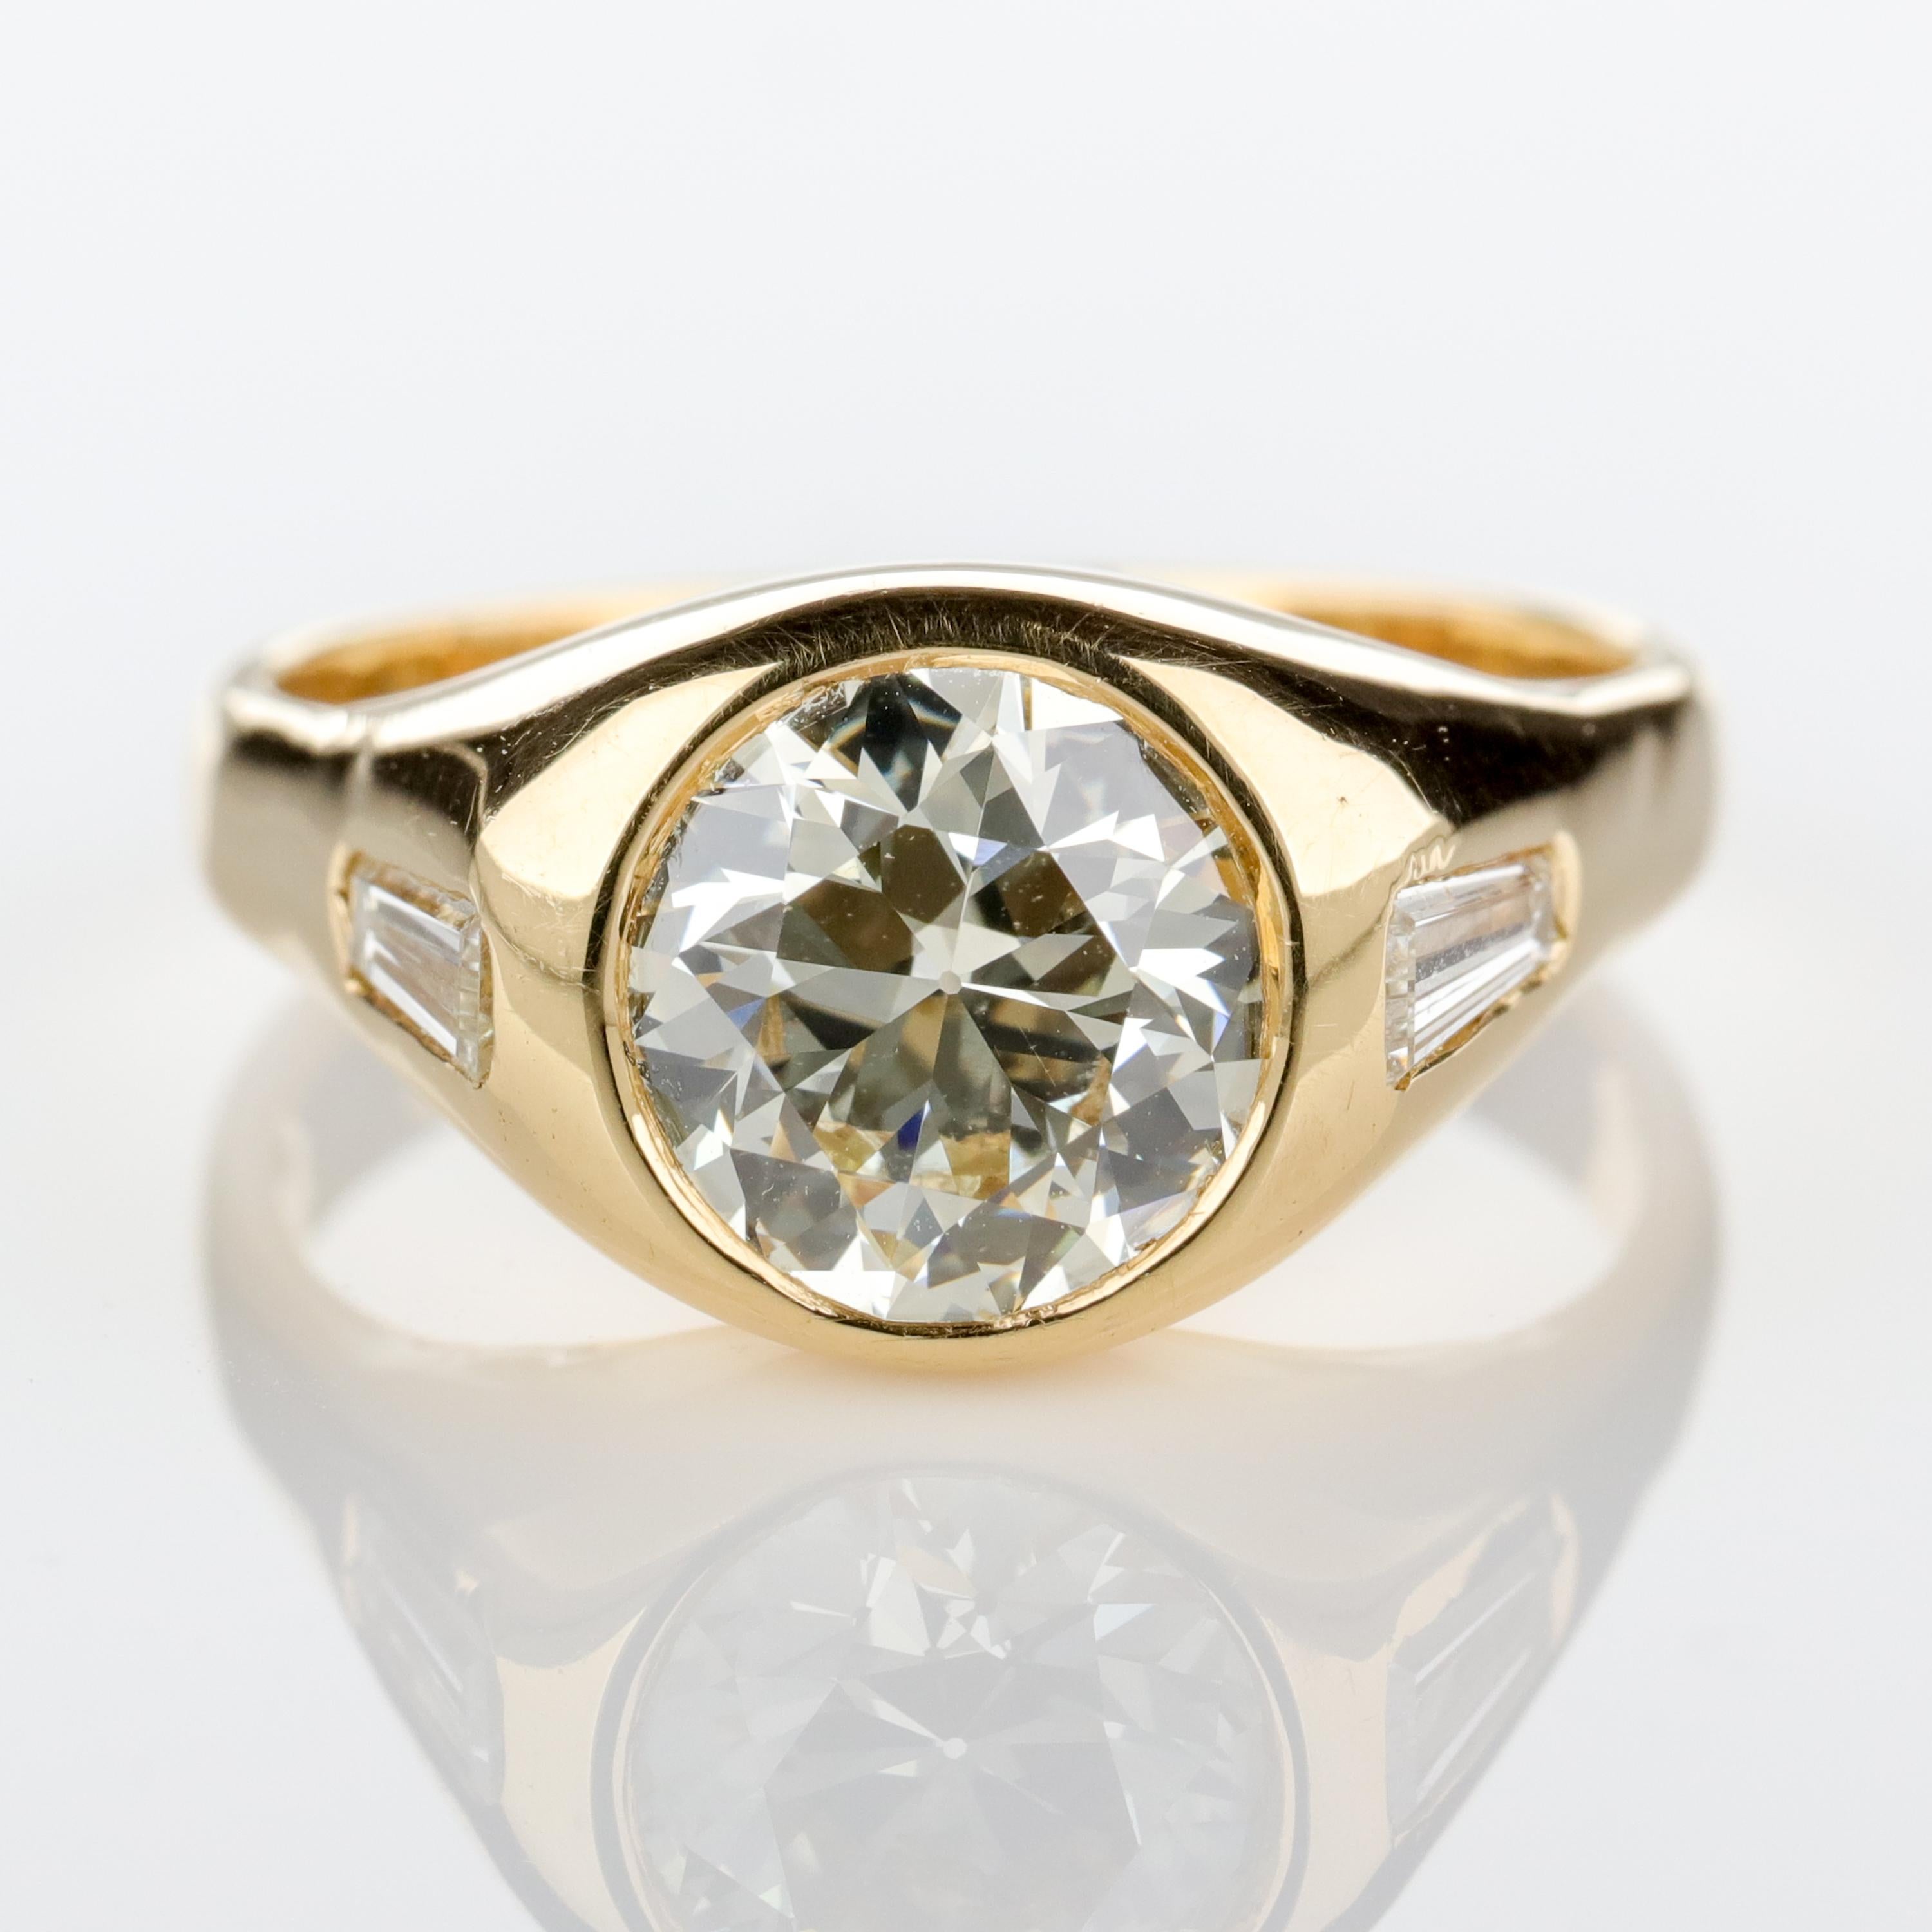 This vintage—circa 1960's—18k yellow gold ring features a firey 2-carat old European-cut diamond of excellent color (L-M) and clarity (VS). Two 4.4 mm x 2.3 mm tapered baguette diamonds sharpen the shoulders. This is a beautifully-cut old diamond